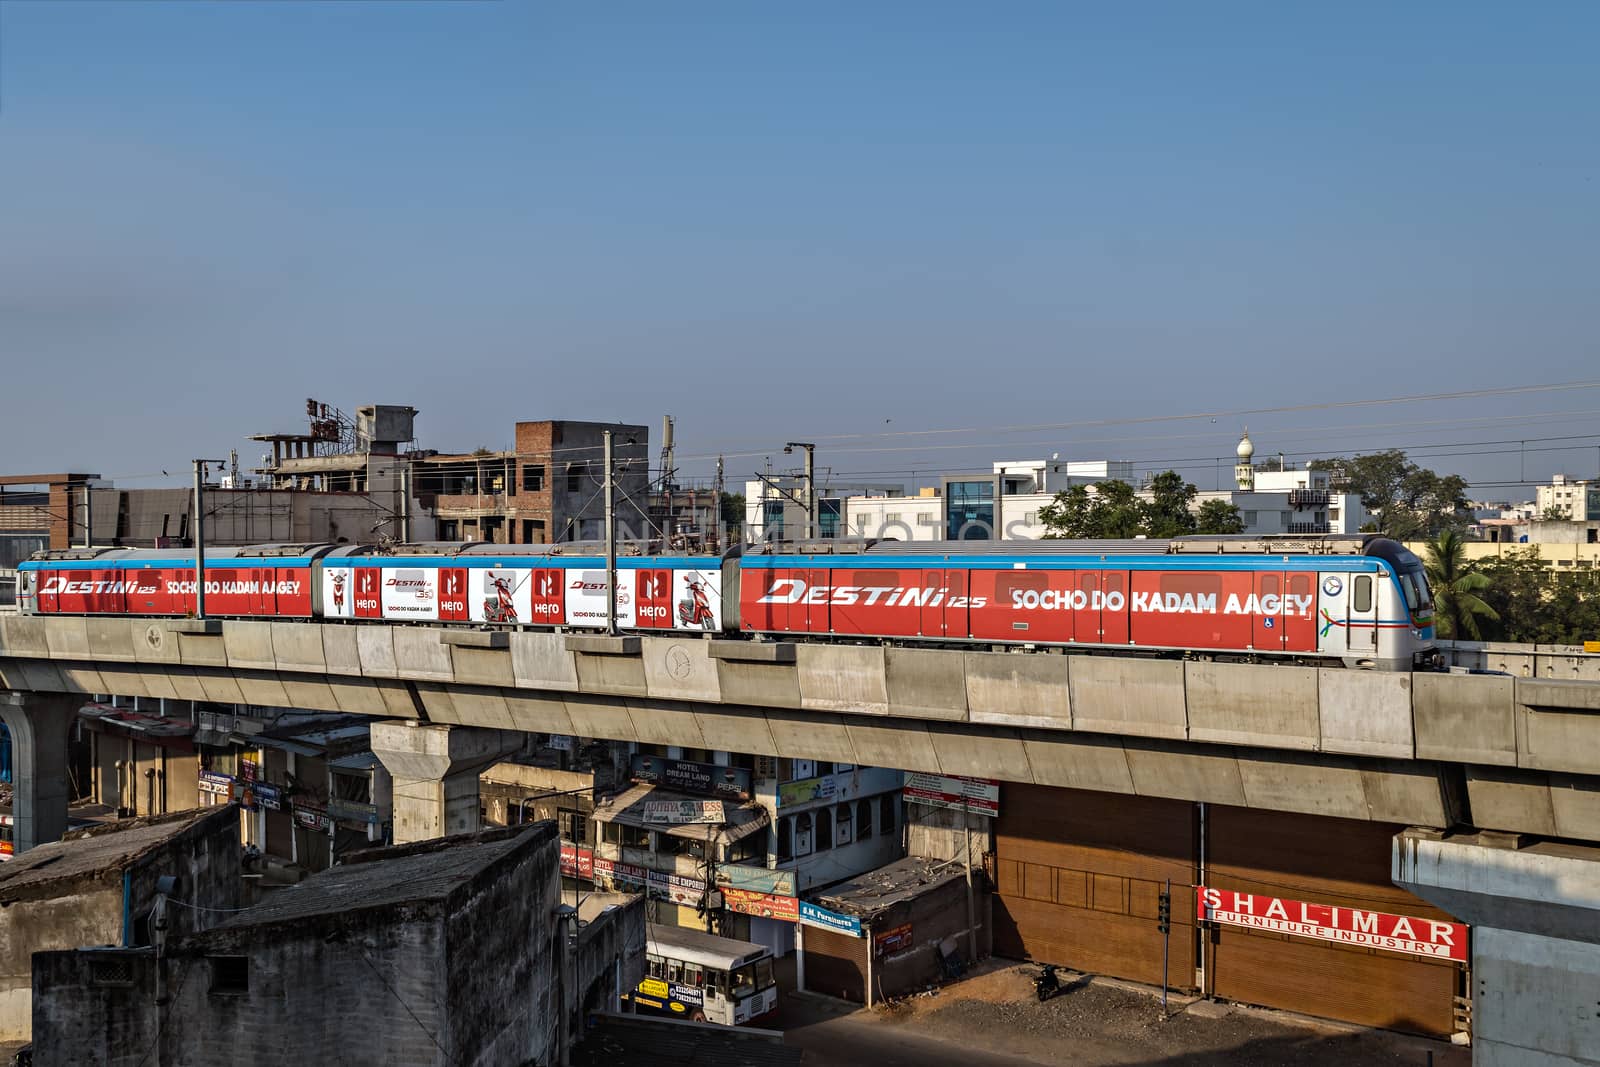 Rapid transit Hyderabad metro train enter Nampally station in the morning. The service has successfully completed one year in 2019 by lalam